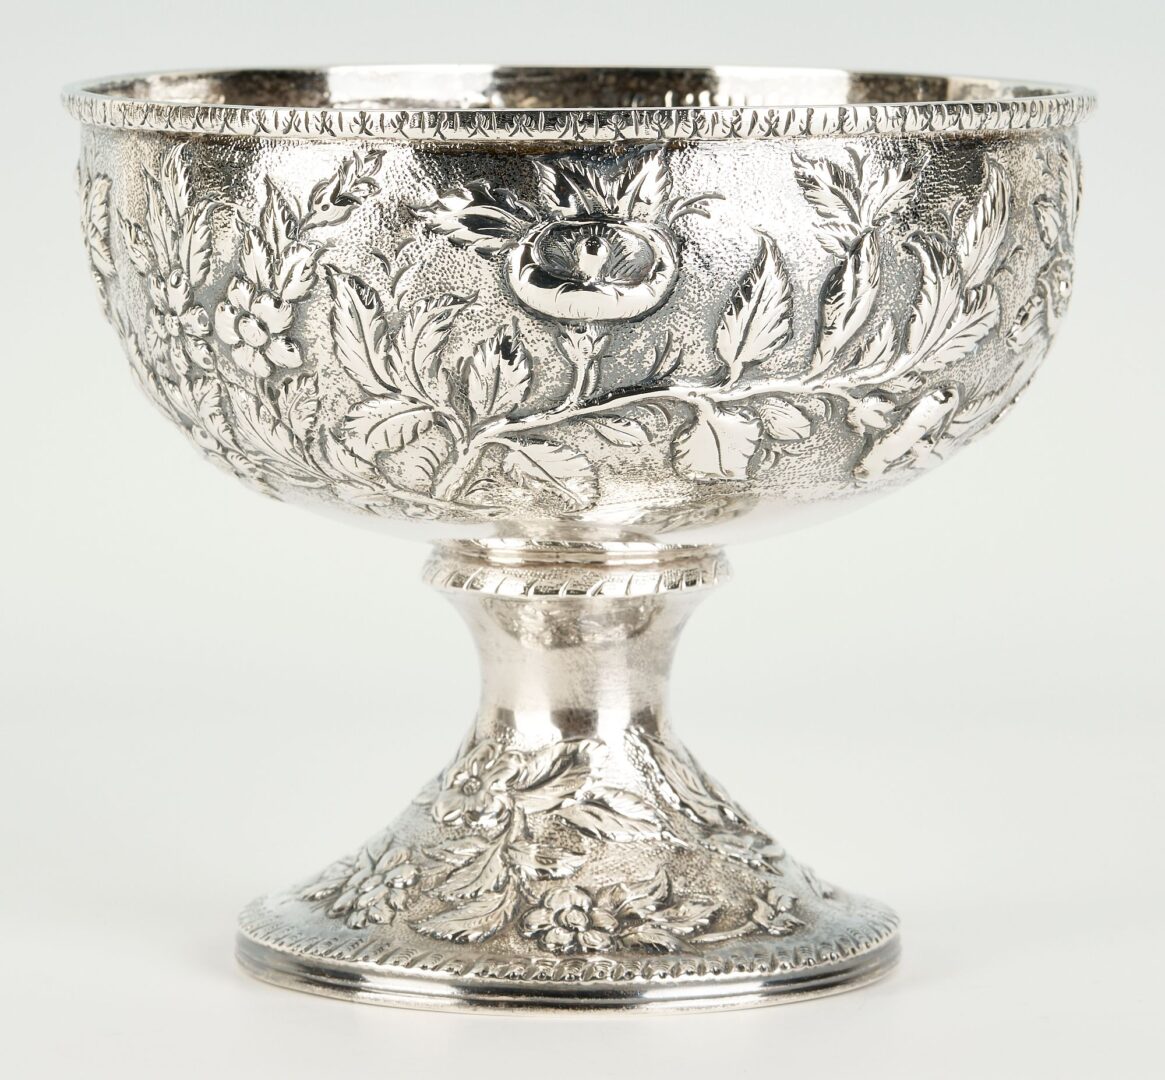 Lot 655: Kirk & Son Silver Repousse Compote, 19th century